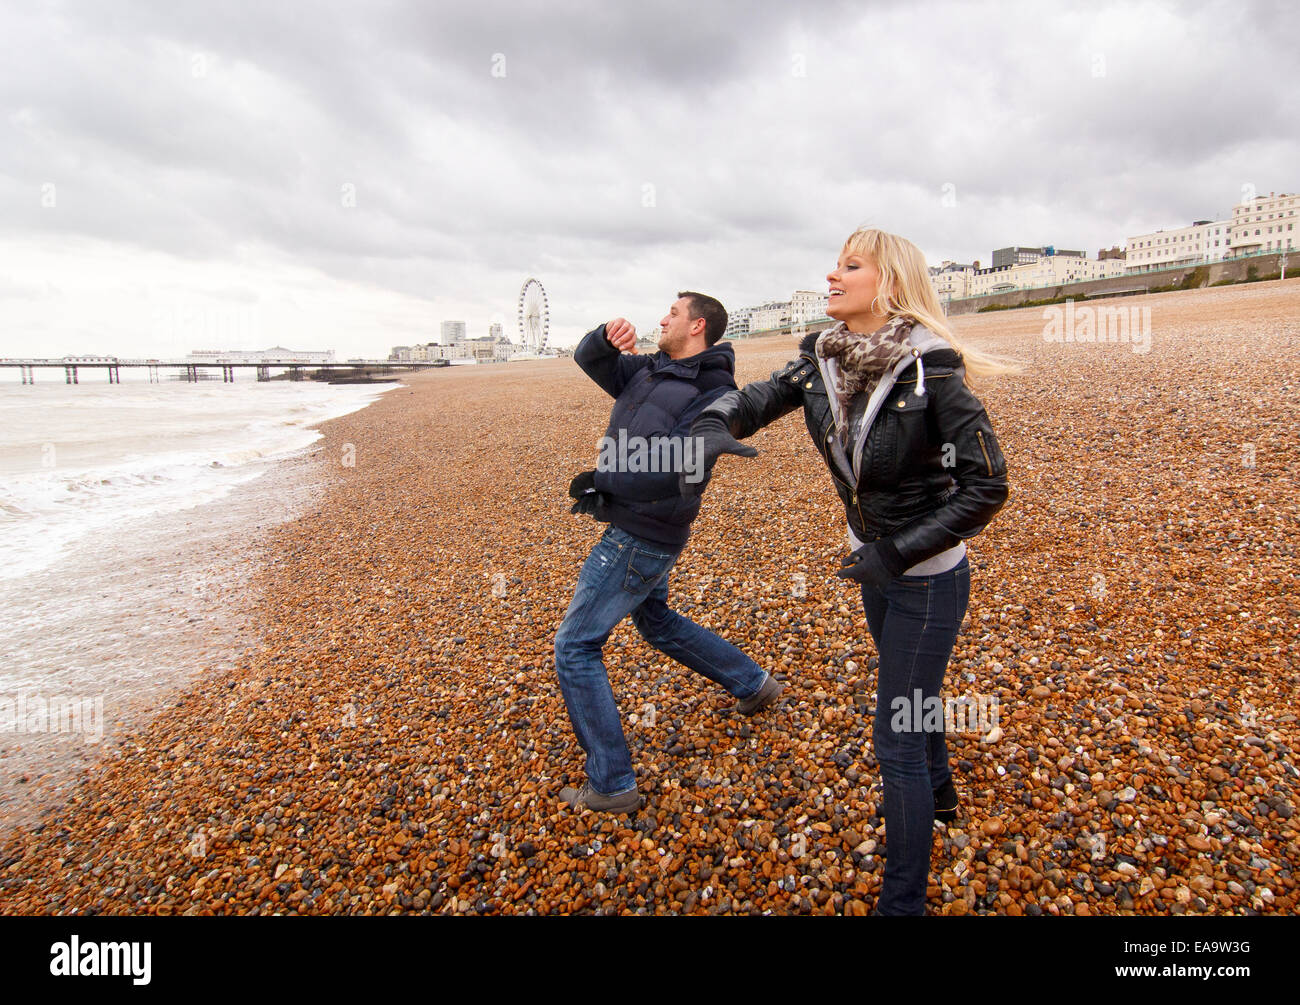 A couple enjoying a day out at the British seaside in Brighton in warm winter clothing Stock Photo